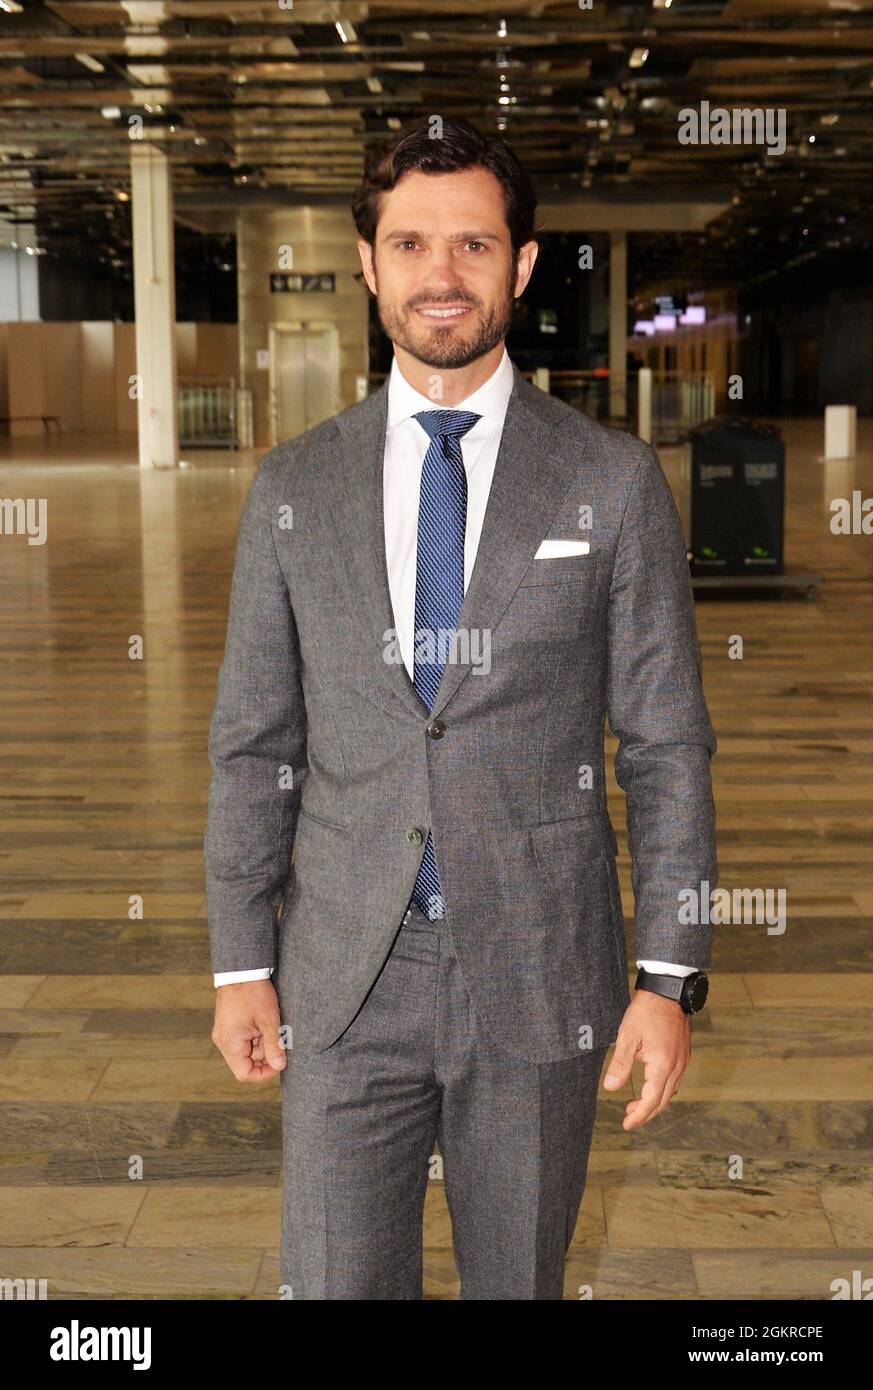 Stockholm, Sweden on September 15, 2021. Prince Carl Philip arrives at the meeting with the Swedish team ahead of the Bocuse d'Or WC 2021, Stockholm, Sweden on September 15, 2021. Photo by Peter Johansson/Stella Pictures/ABACAPRESS.COM Stock Photo